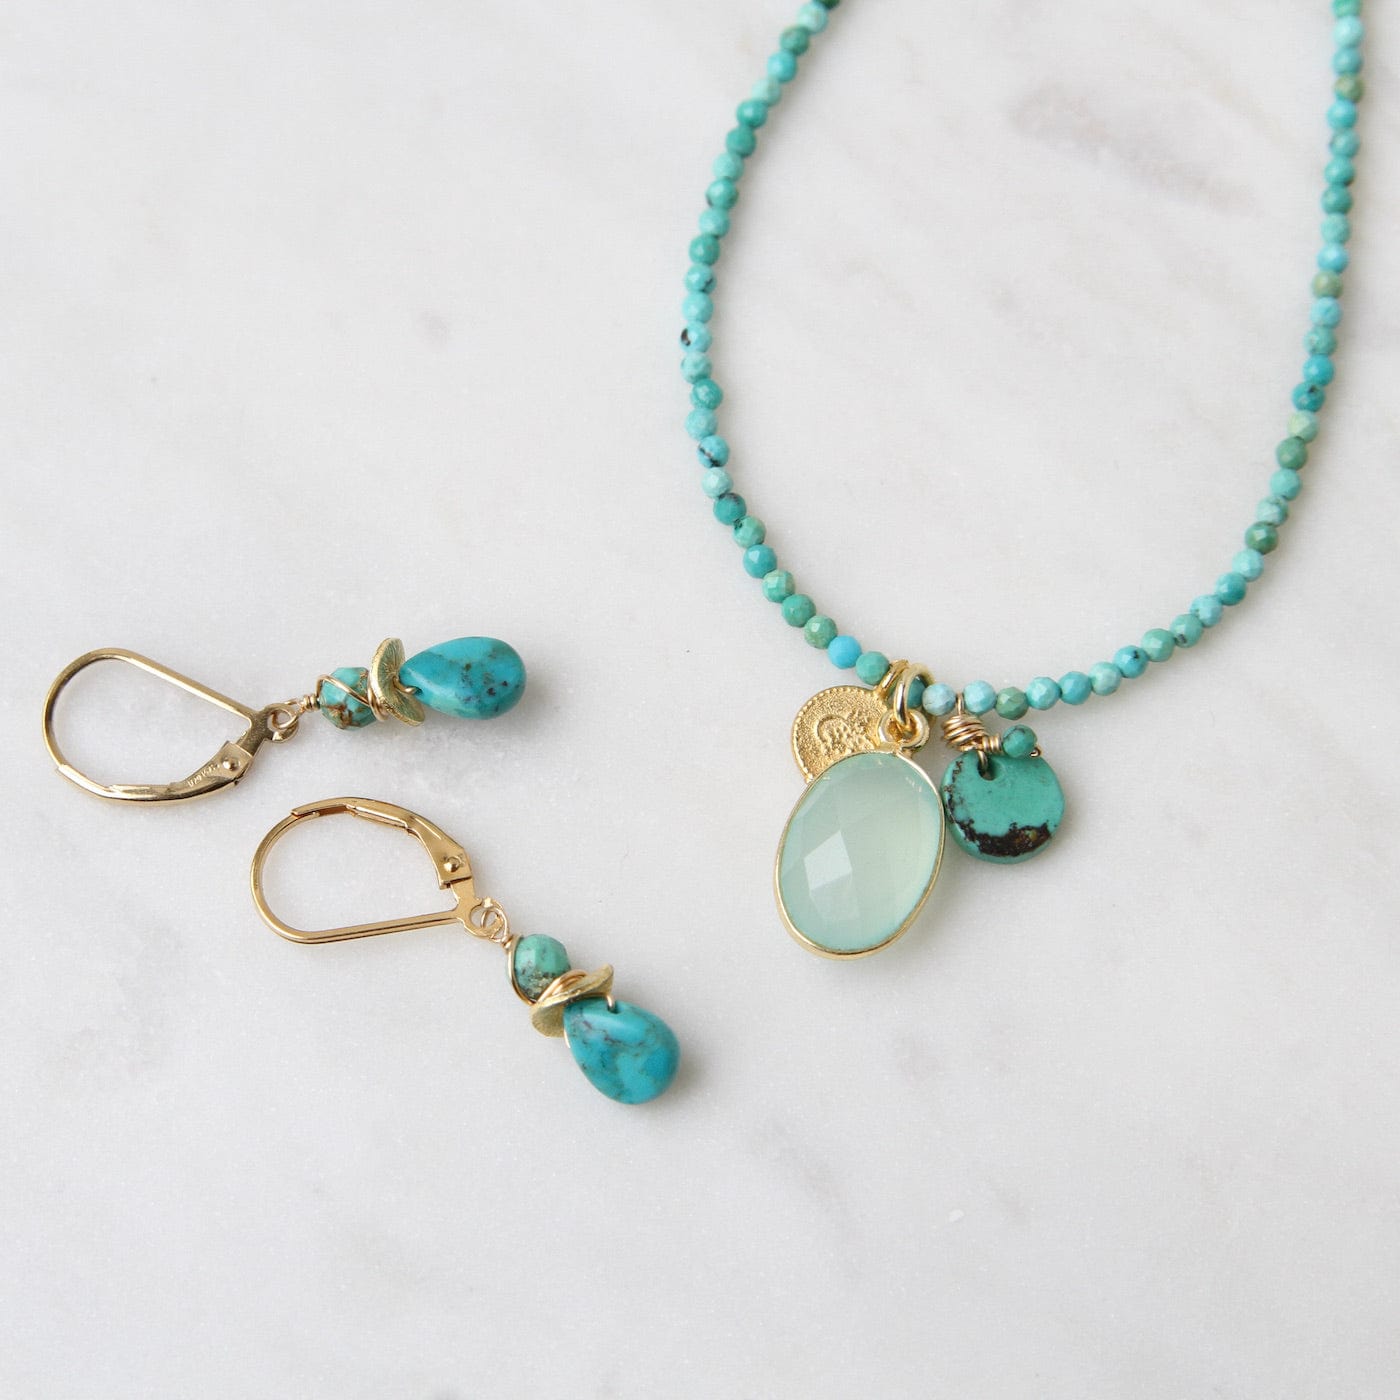 NKL-GF Strung Turquoise with Chalcedony Pendant Necklace